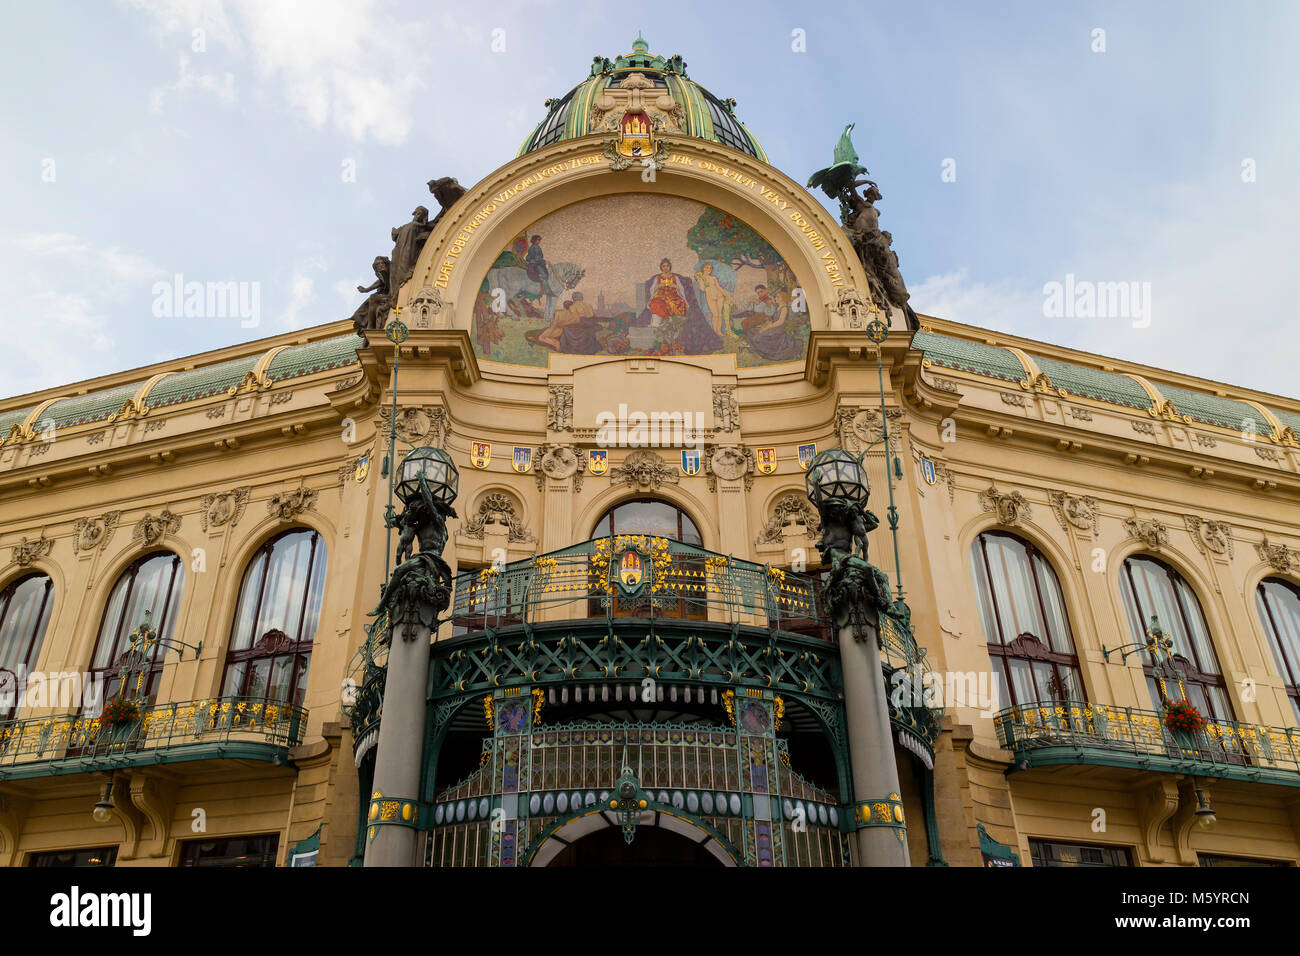 Prague, Czech Republic - October 9, 2017: The Art Nouveau building Municipal House in Prague with gold trimmings, stained glass  and sculpture Stock Photo